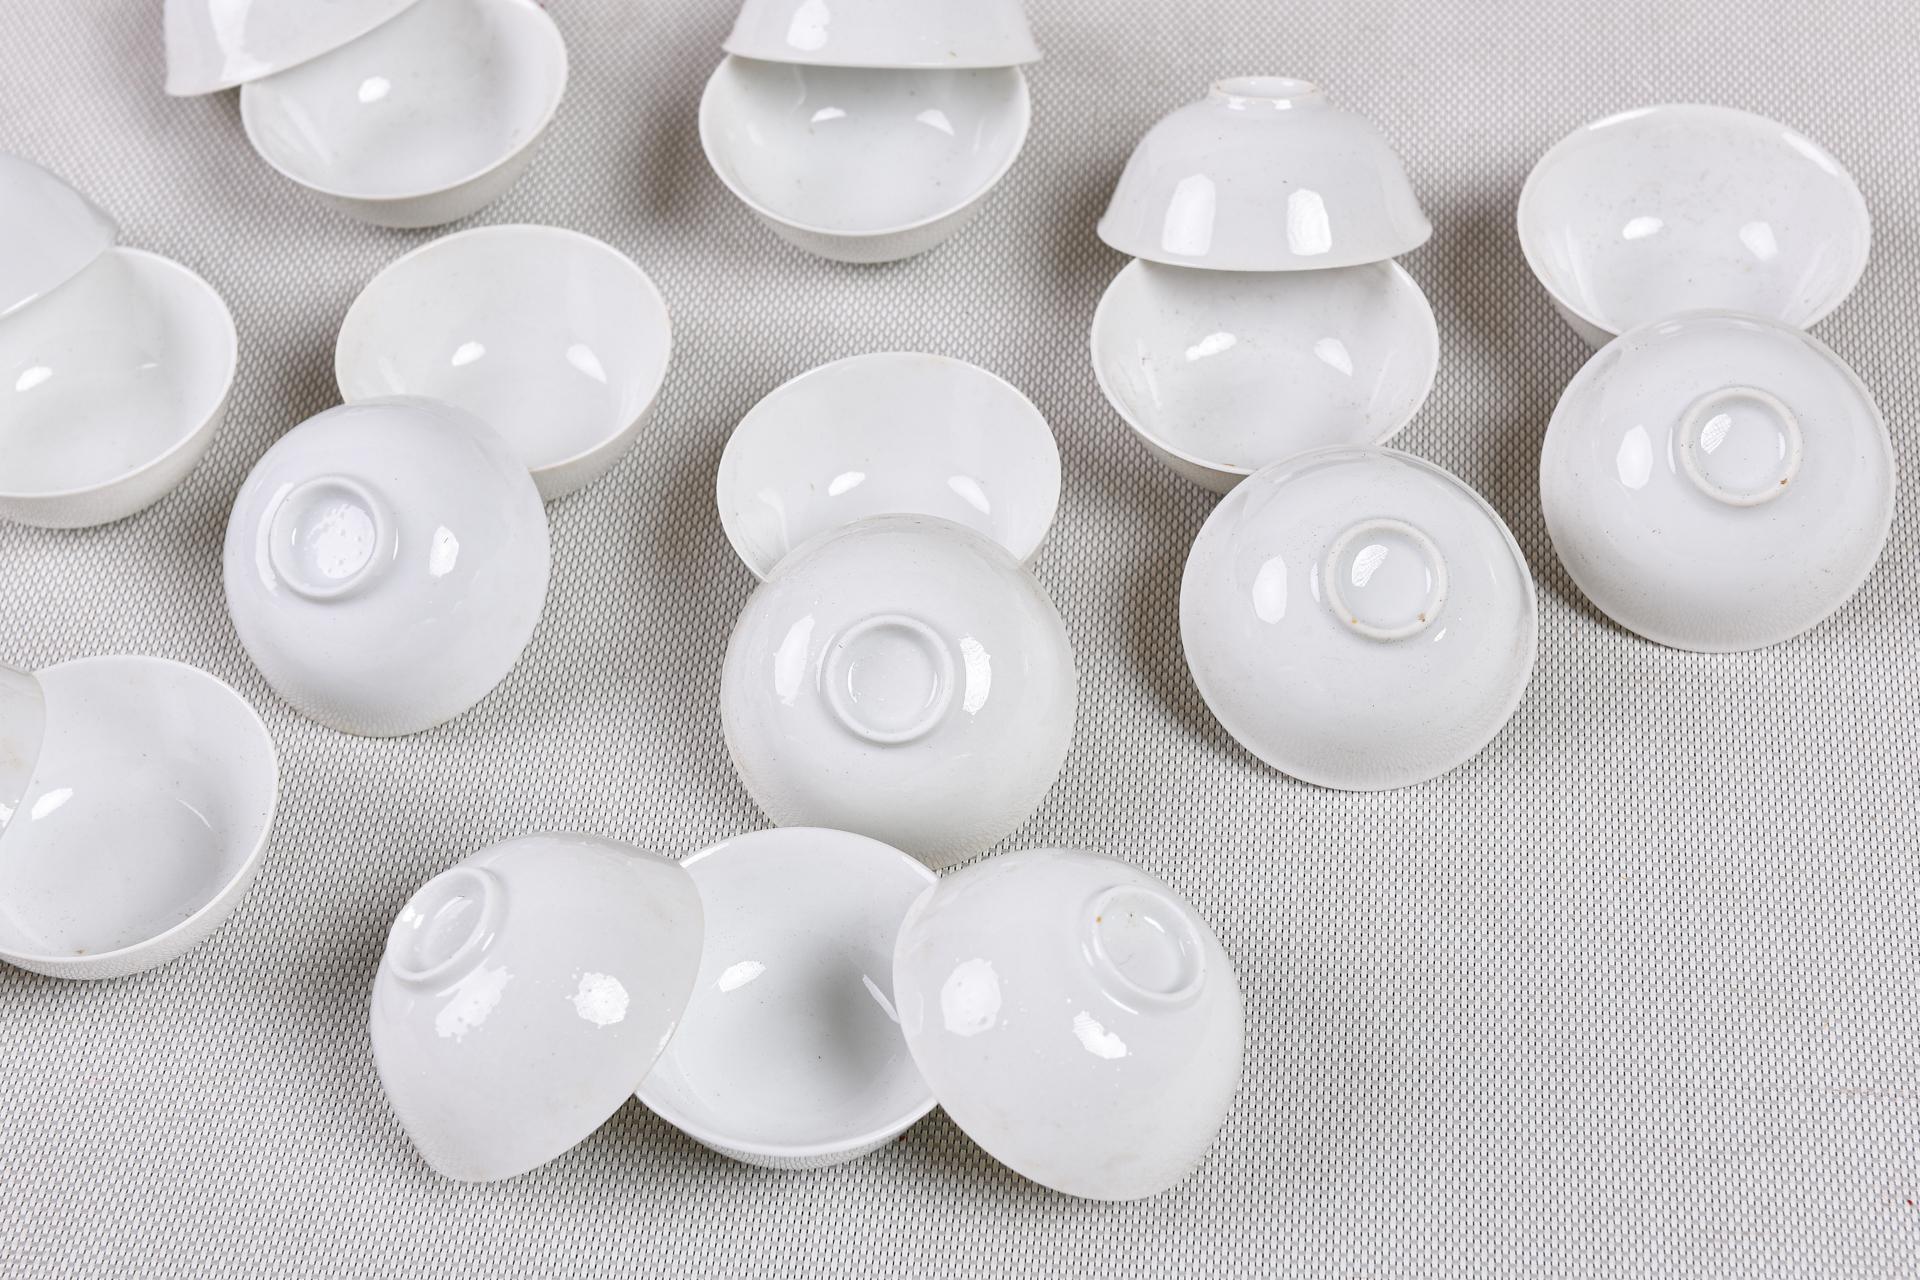 180 Small Bowls in Very Fine White Porcelain In Excellent Condition For Sale In Alessandria, Piemonte